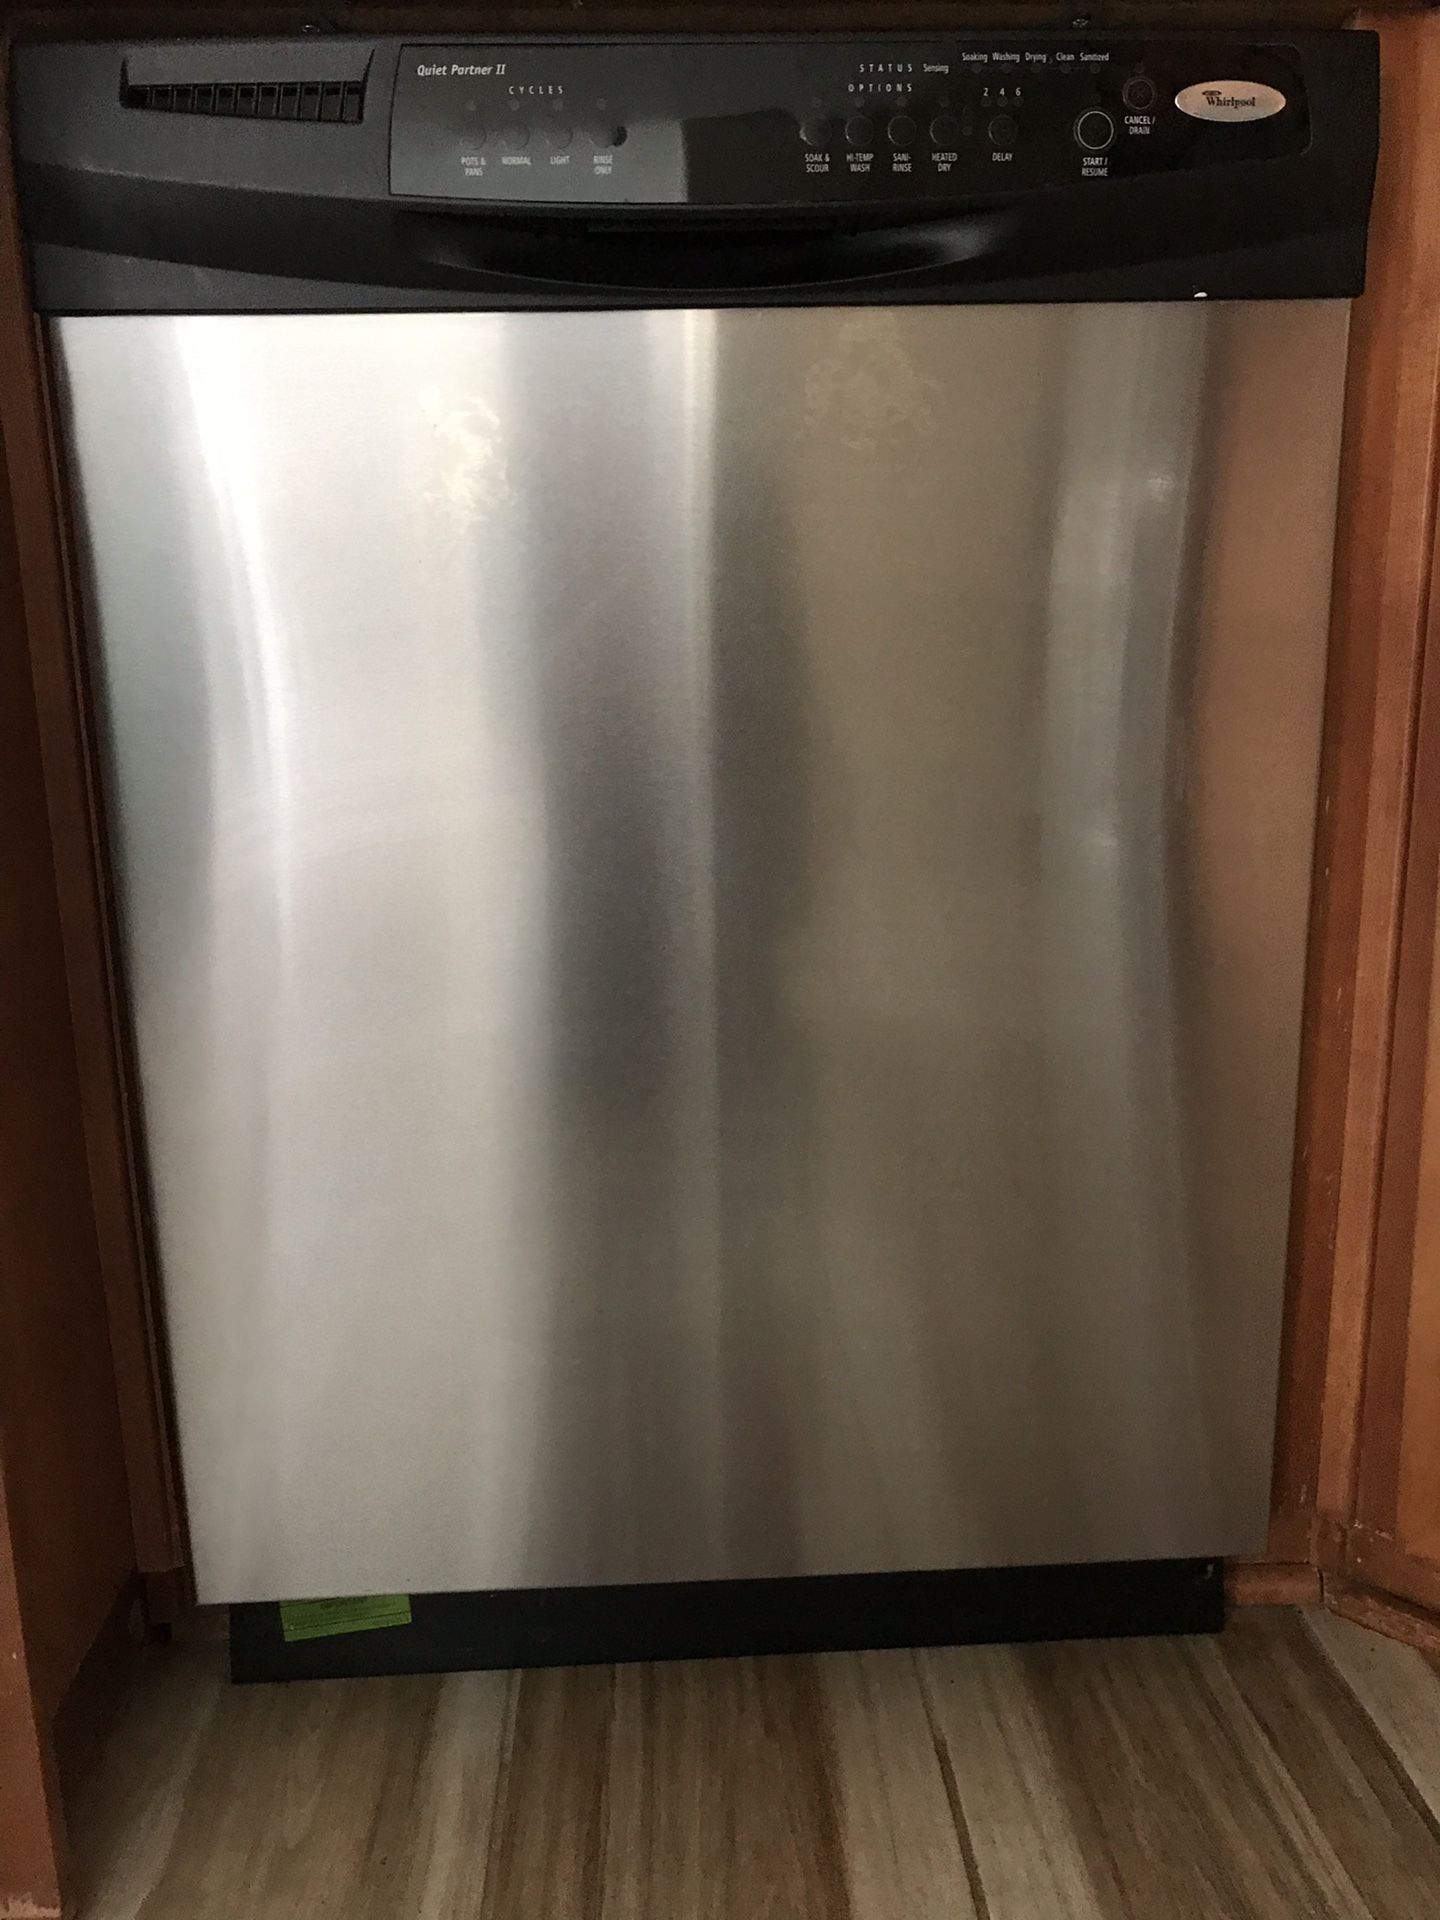 Whirlpool Dishwasher Used Appliance - Great Condition!